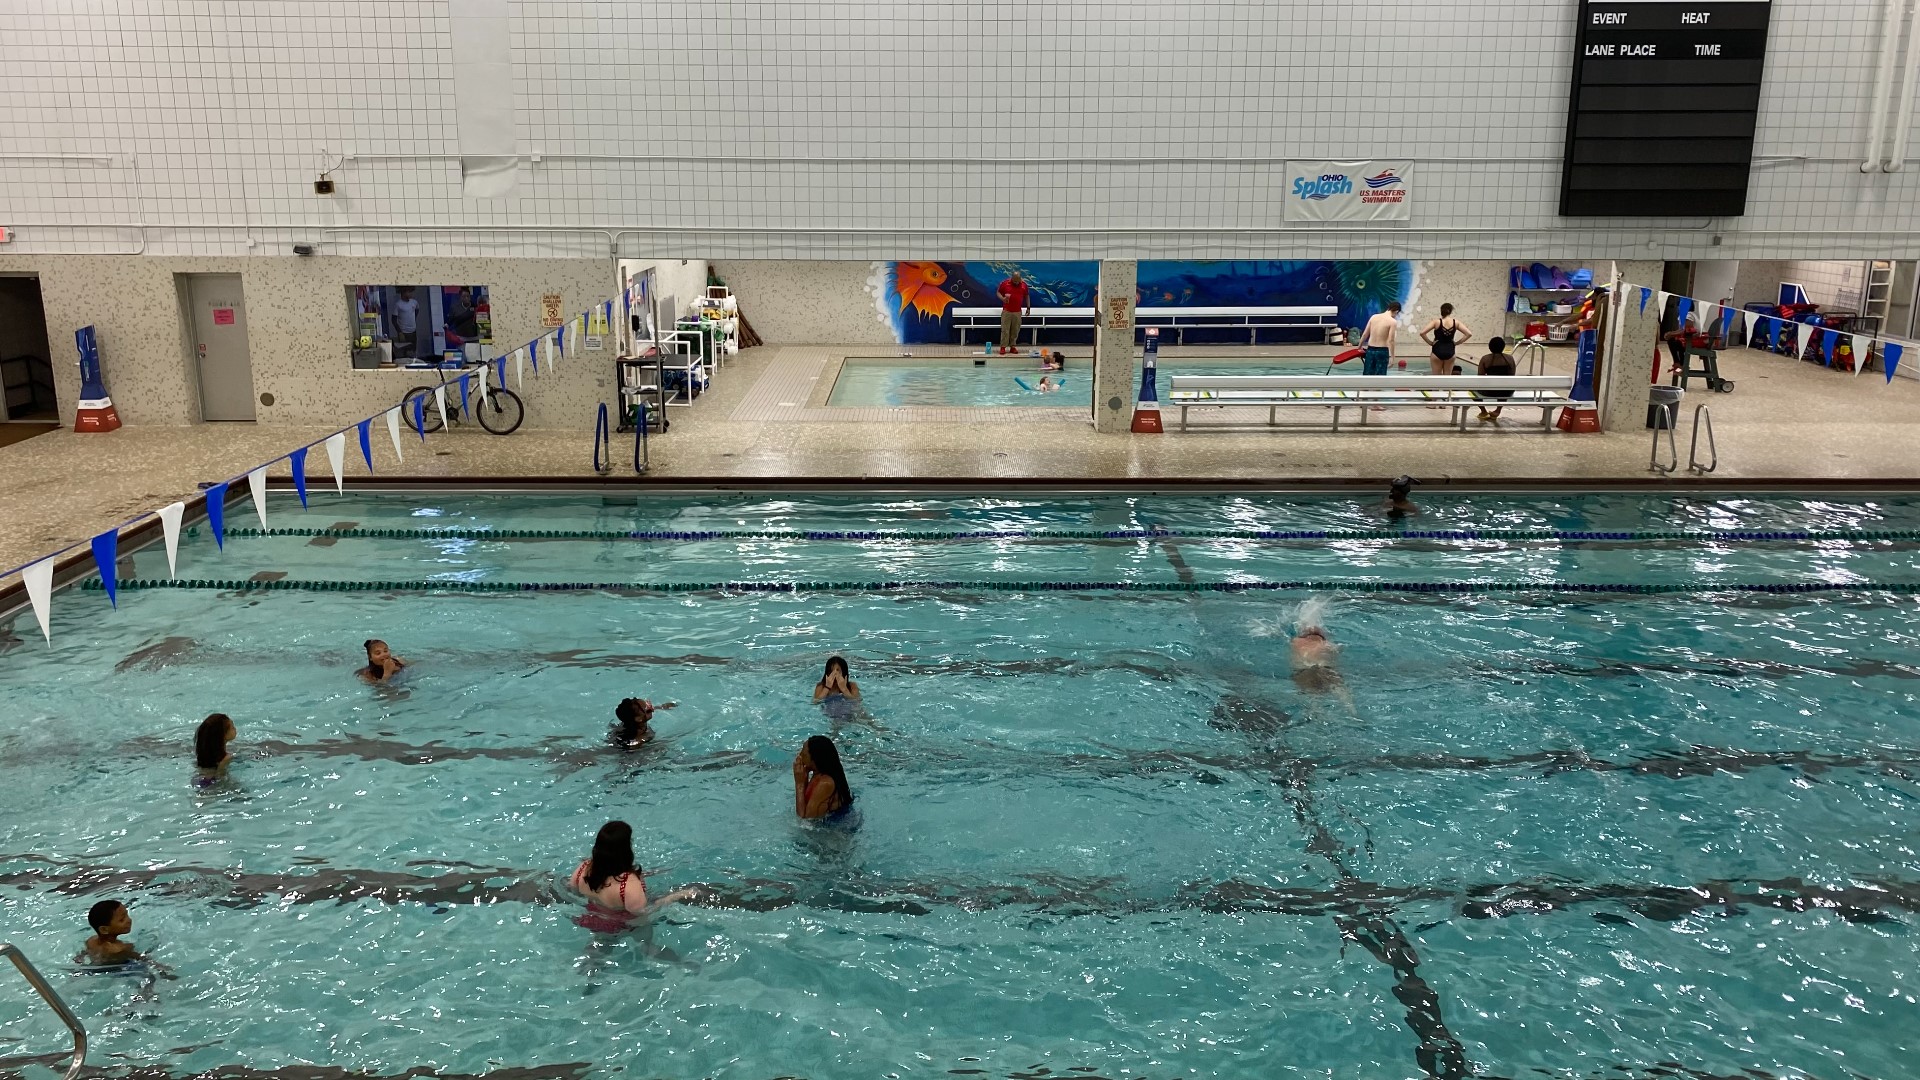 Both City of Columbus and YMCA says the need more people to patrol their pools.